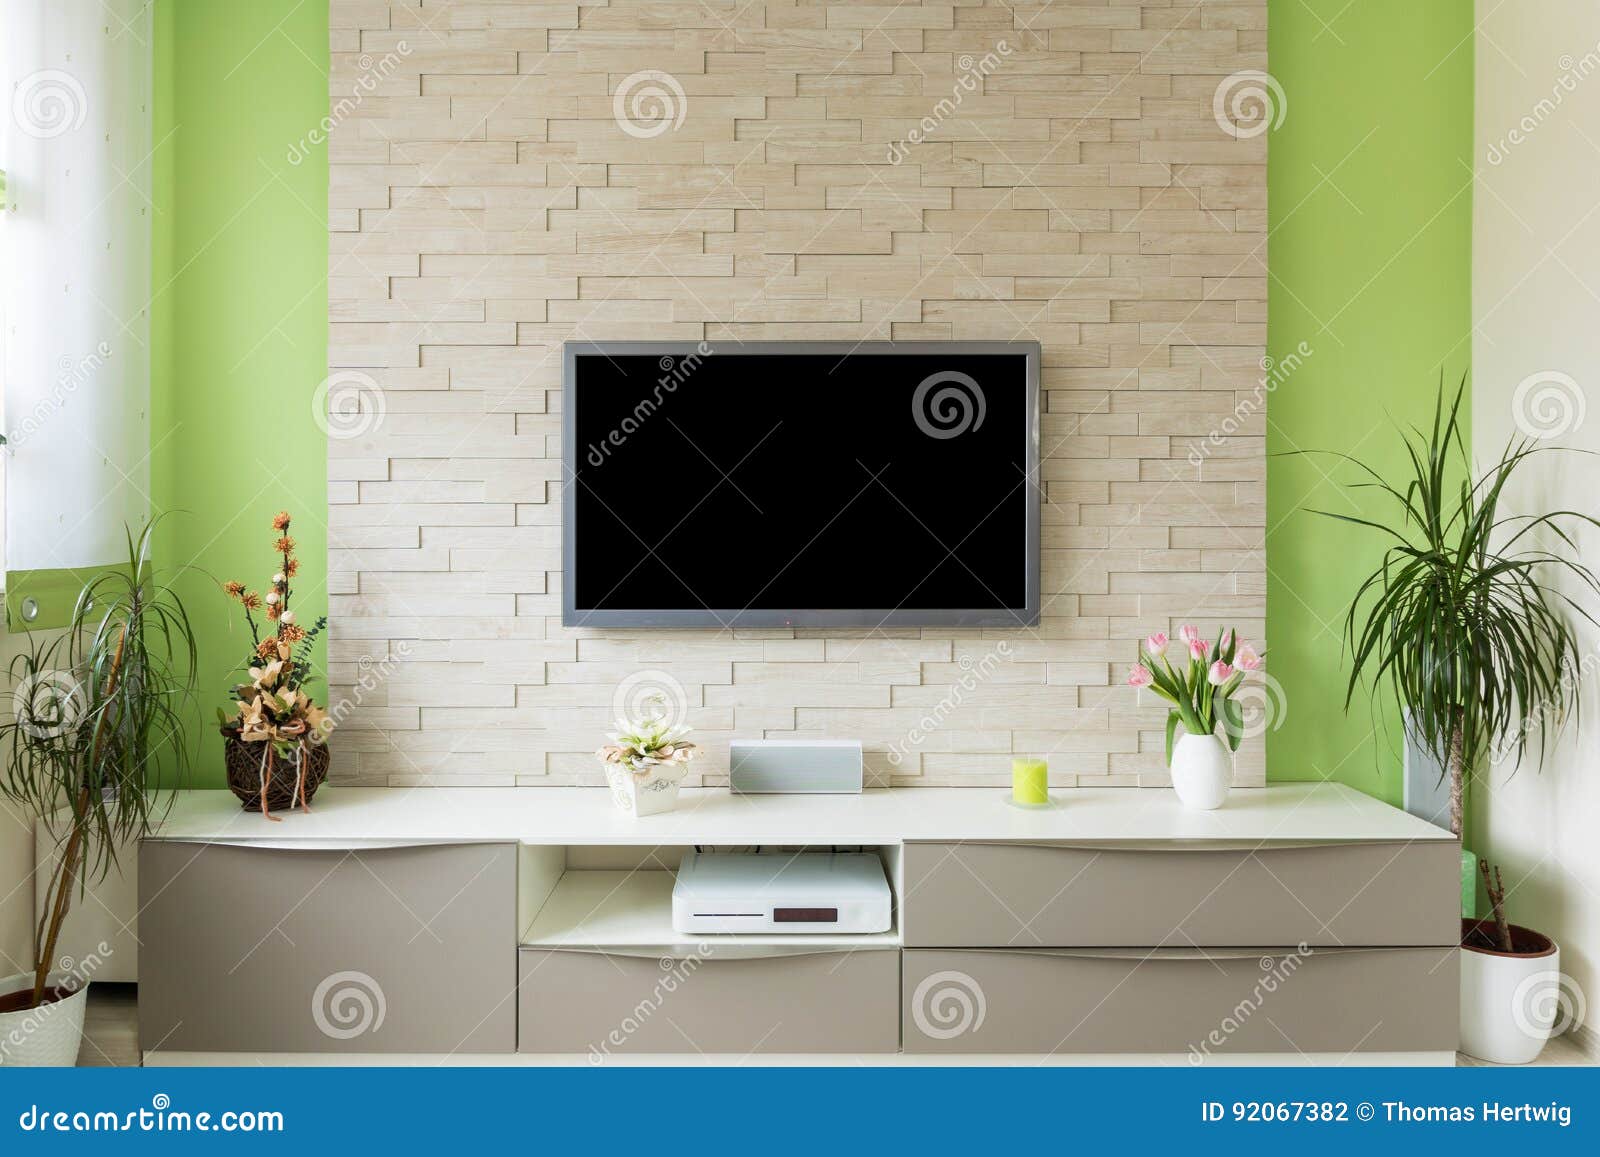 modern living room interior - tv mounted on brick wall with black screen